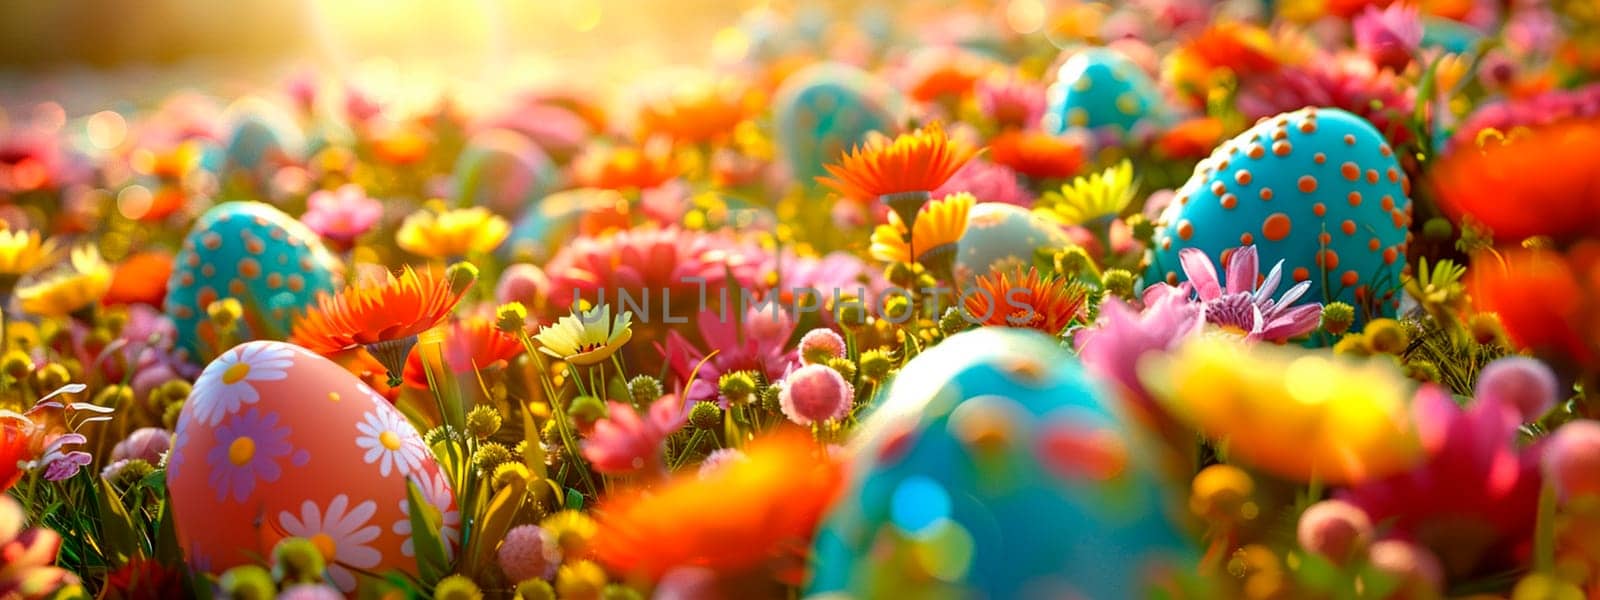 Easter eggs and flowers in the garden. Selective focus. Holiday.